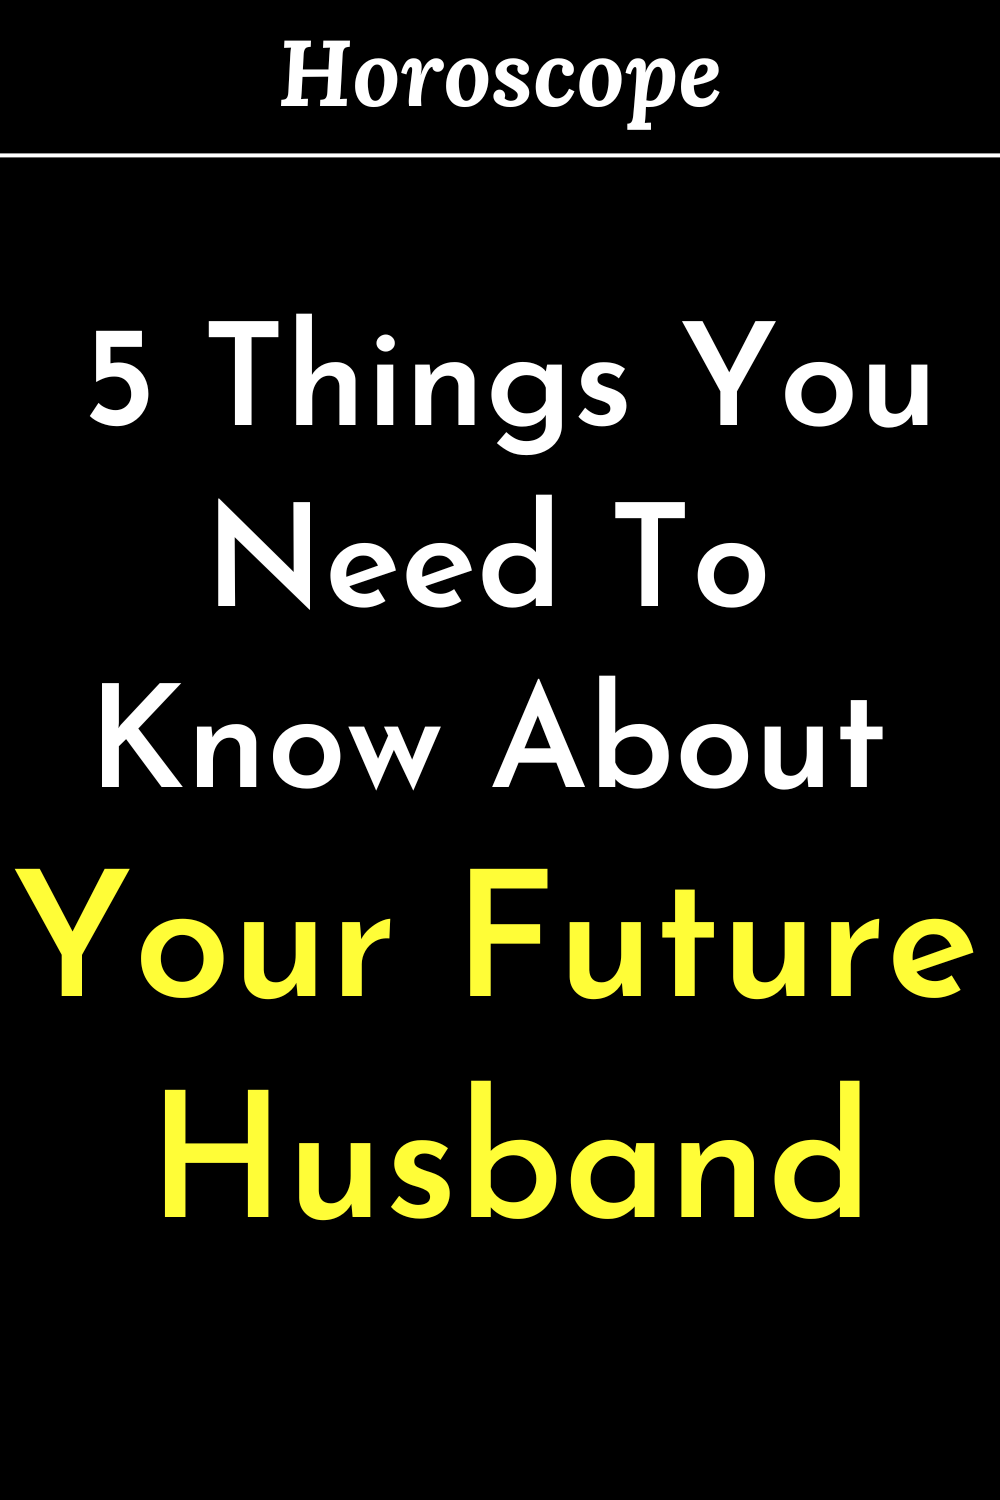 5 Things You Need To Know About Your Future Husband